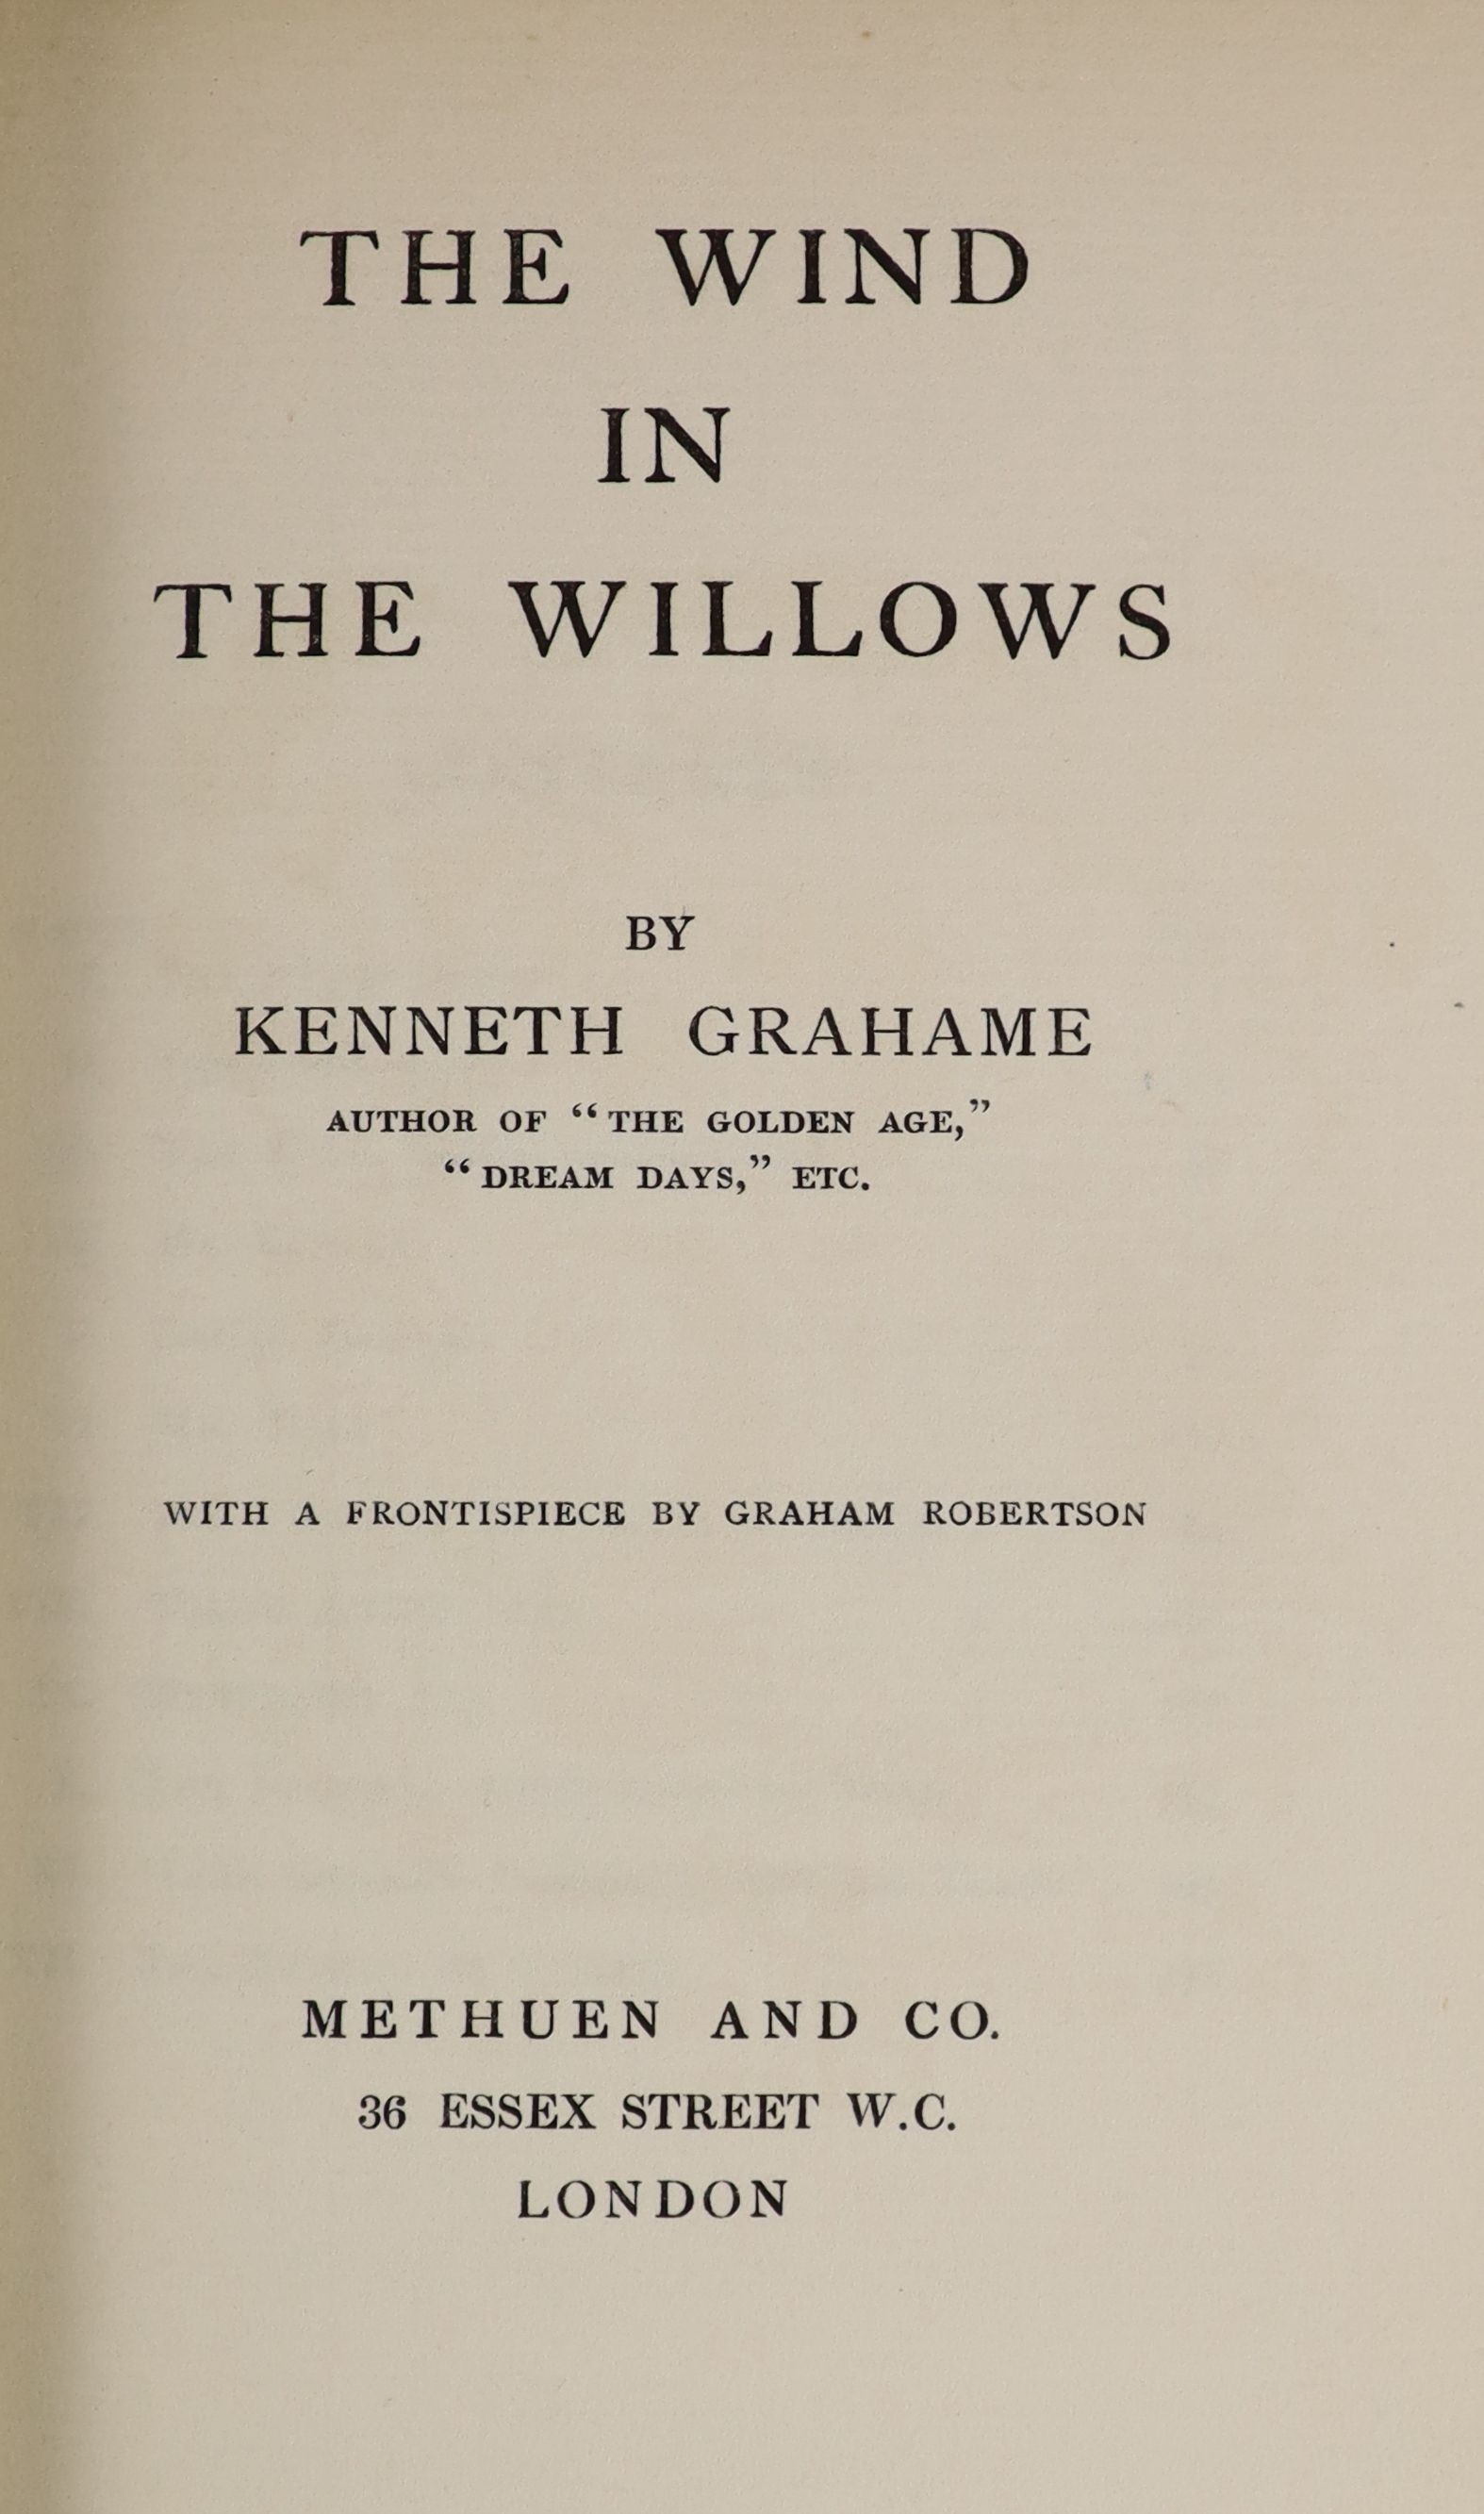 Grahame, Kenneth - The Wind in the Willows, 1st edition, 8vo, original blue green pictorial cloth, depicting The Piper at the Gates of Dawn, half title, tissue guarded frontis by Graham Robertson, top edge gilt, others d